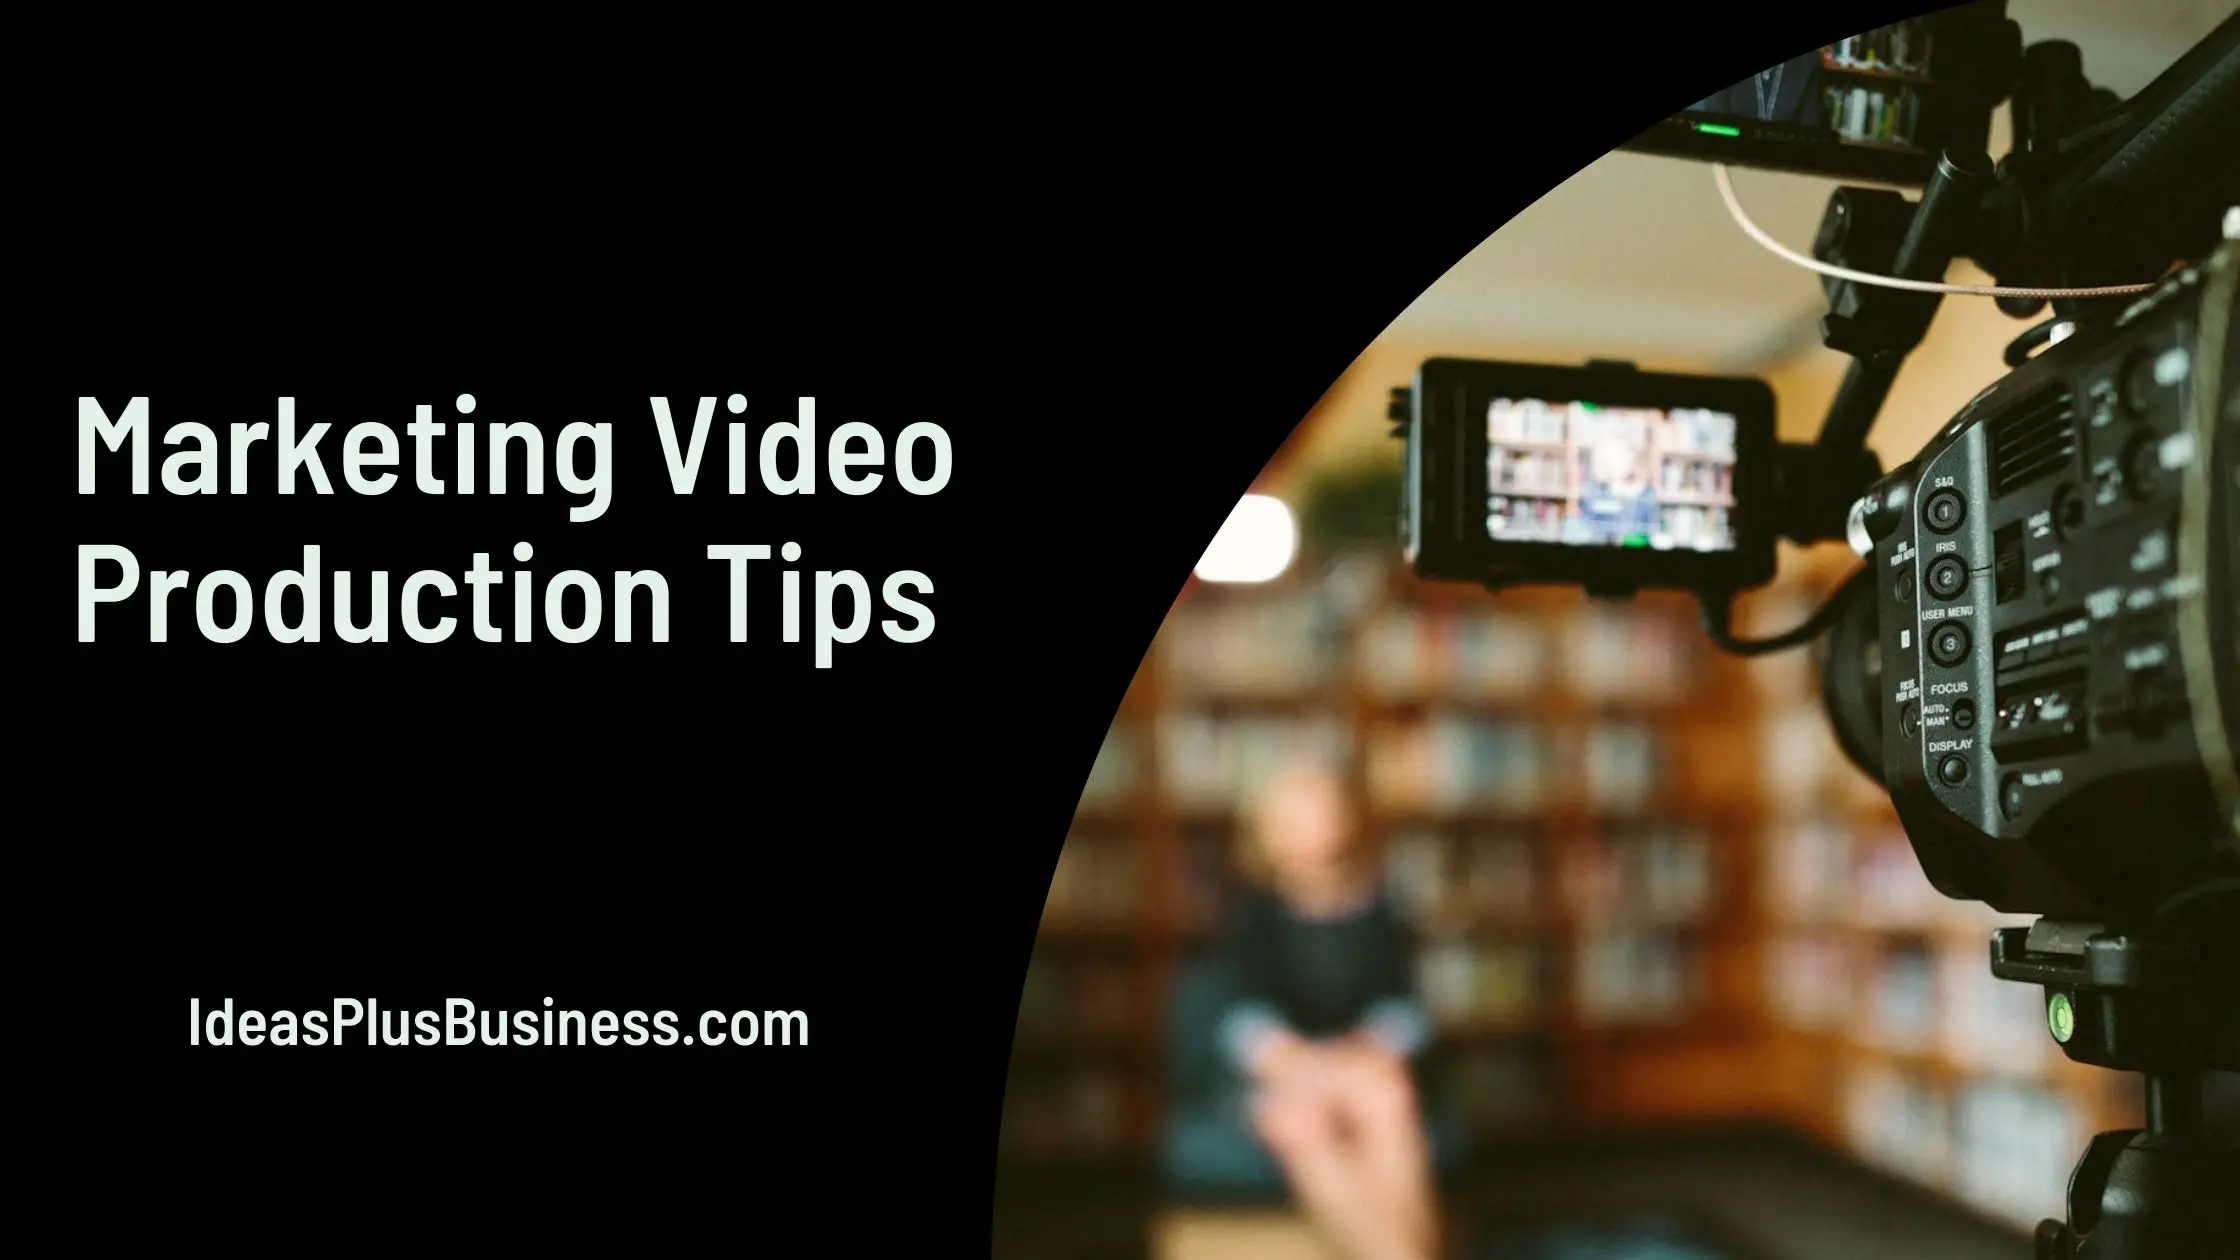 12 Great Marketing Video Production Tips: The Ultimate Guide